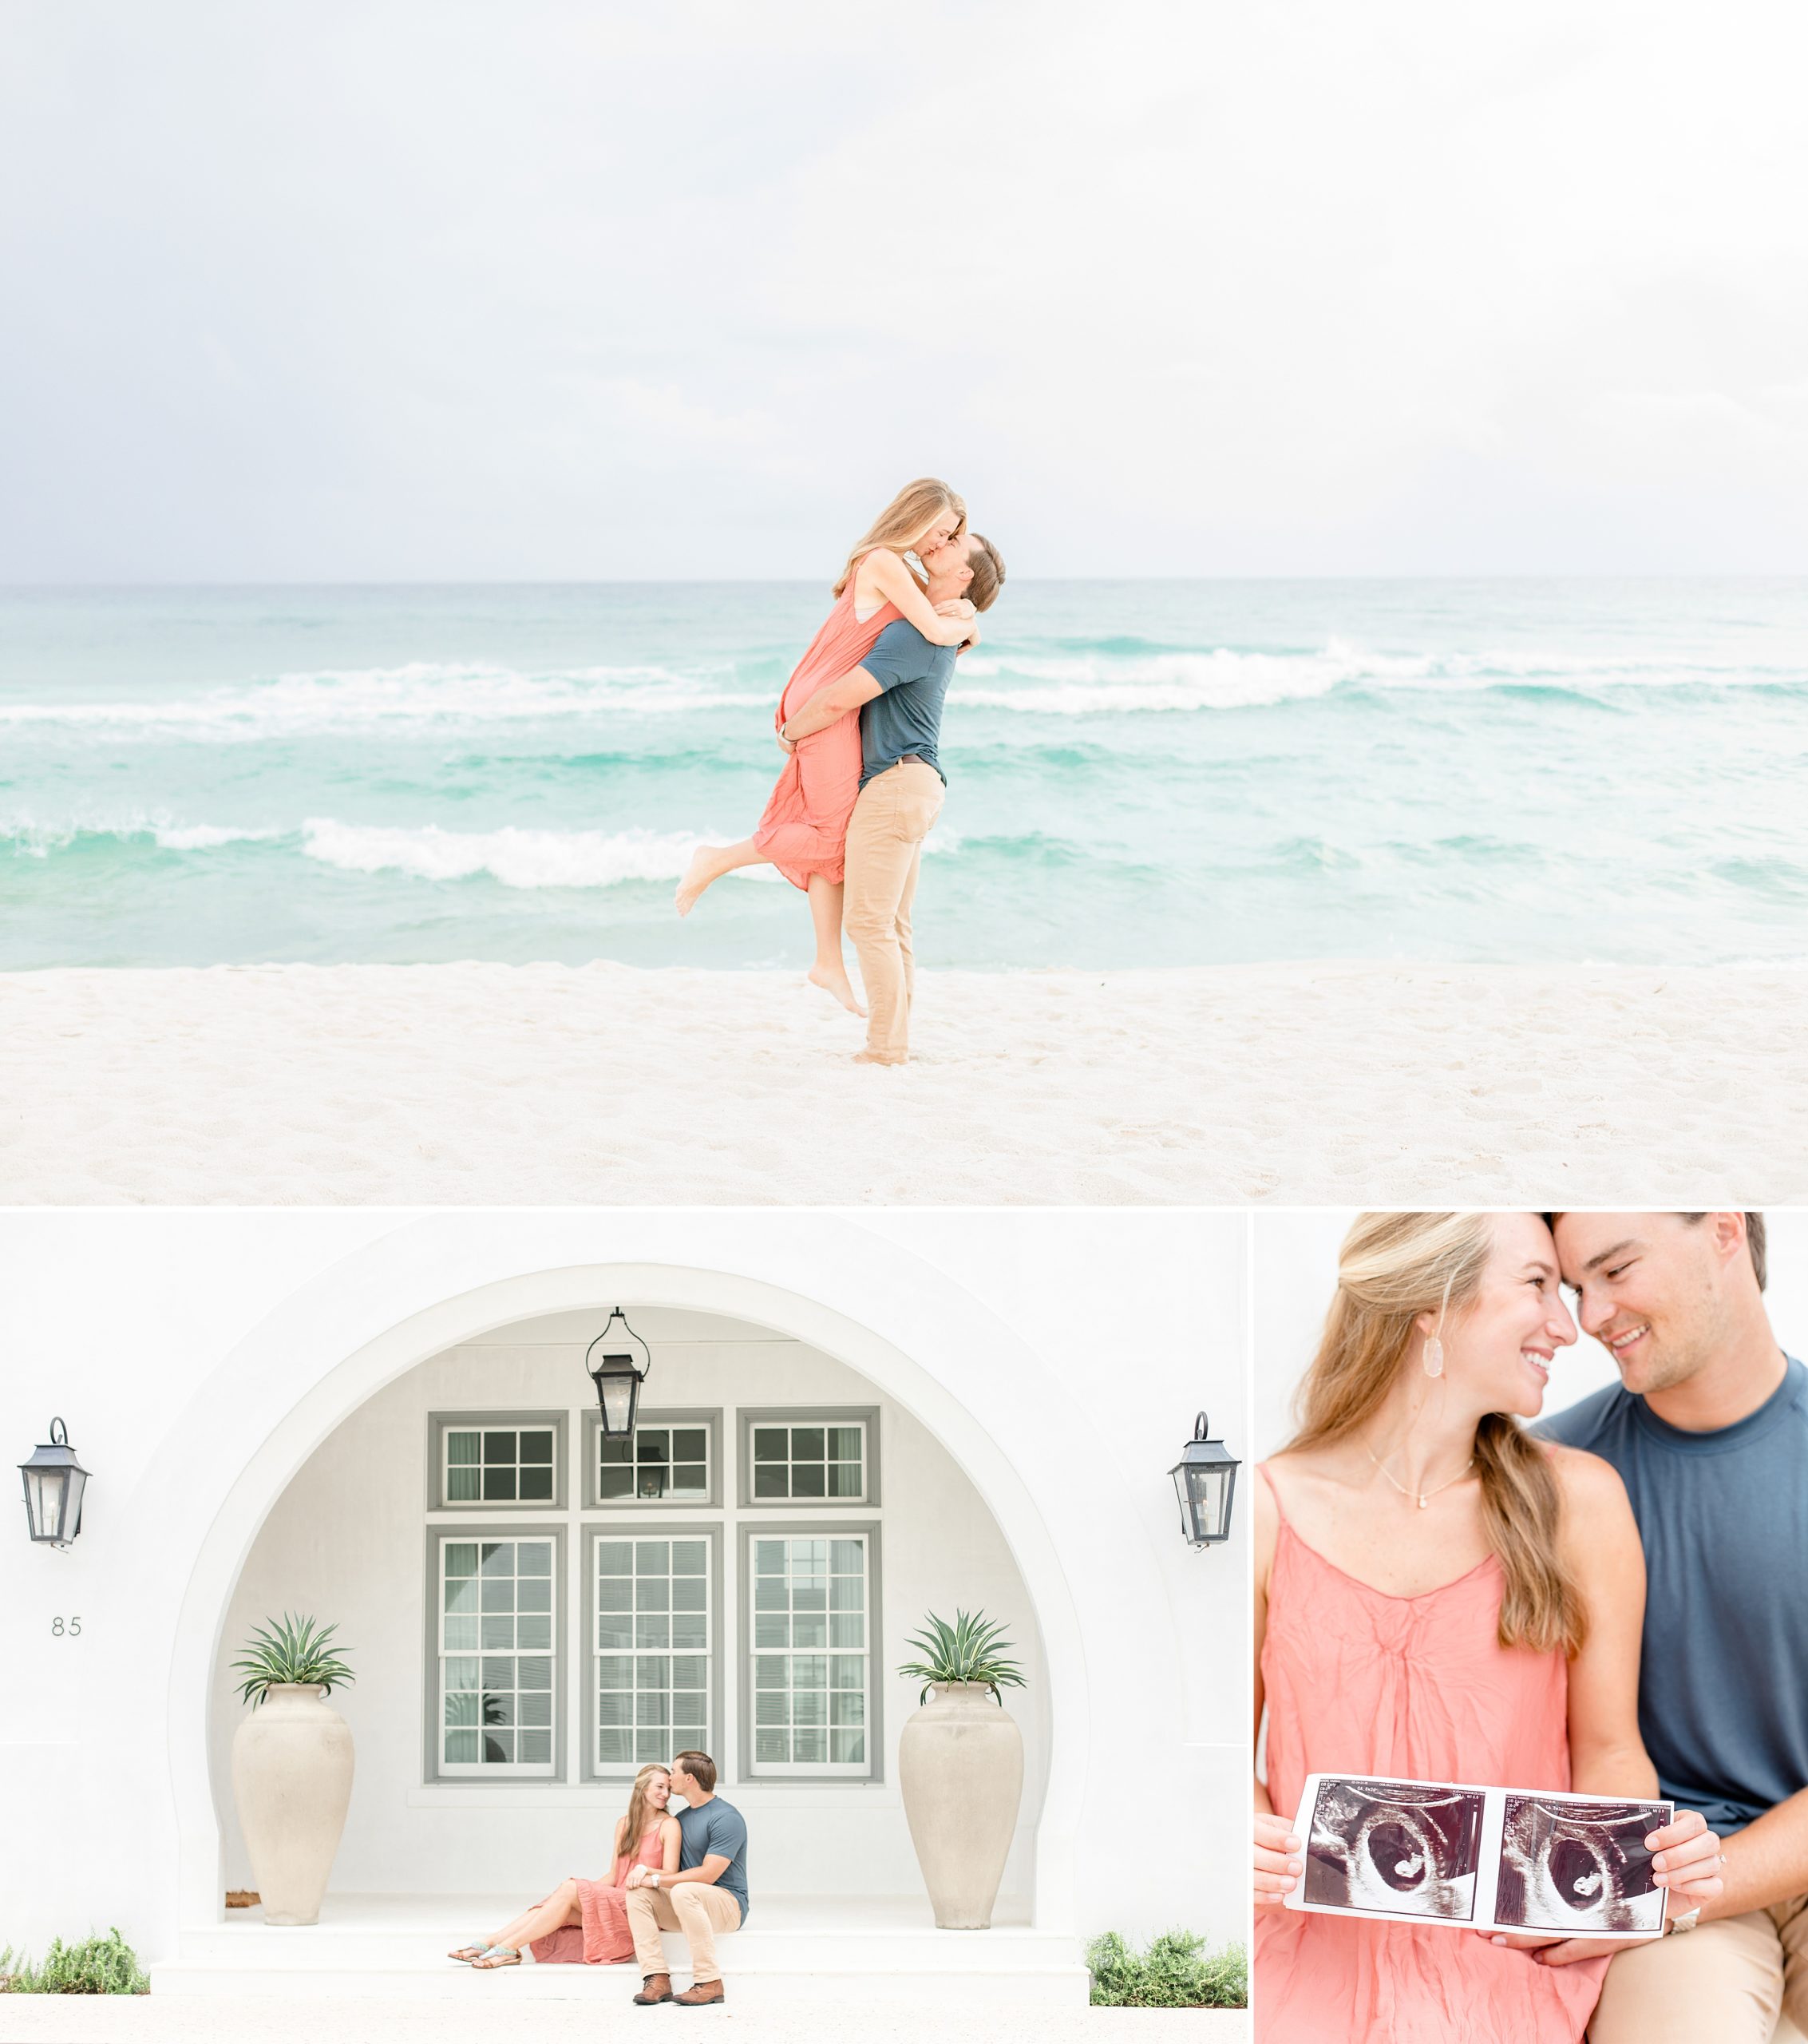 30A Alys Beach Anniversary Session & Pregnancy Announcement - Katie & Alec Photography